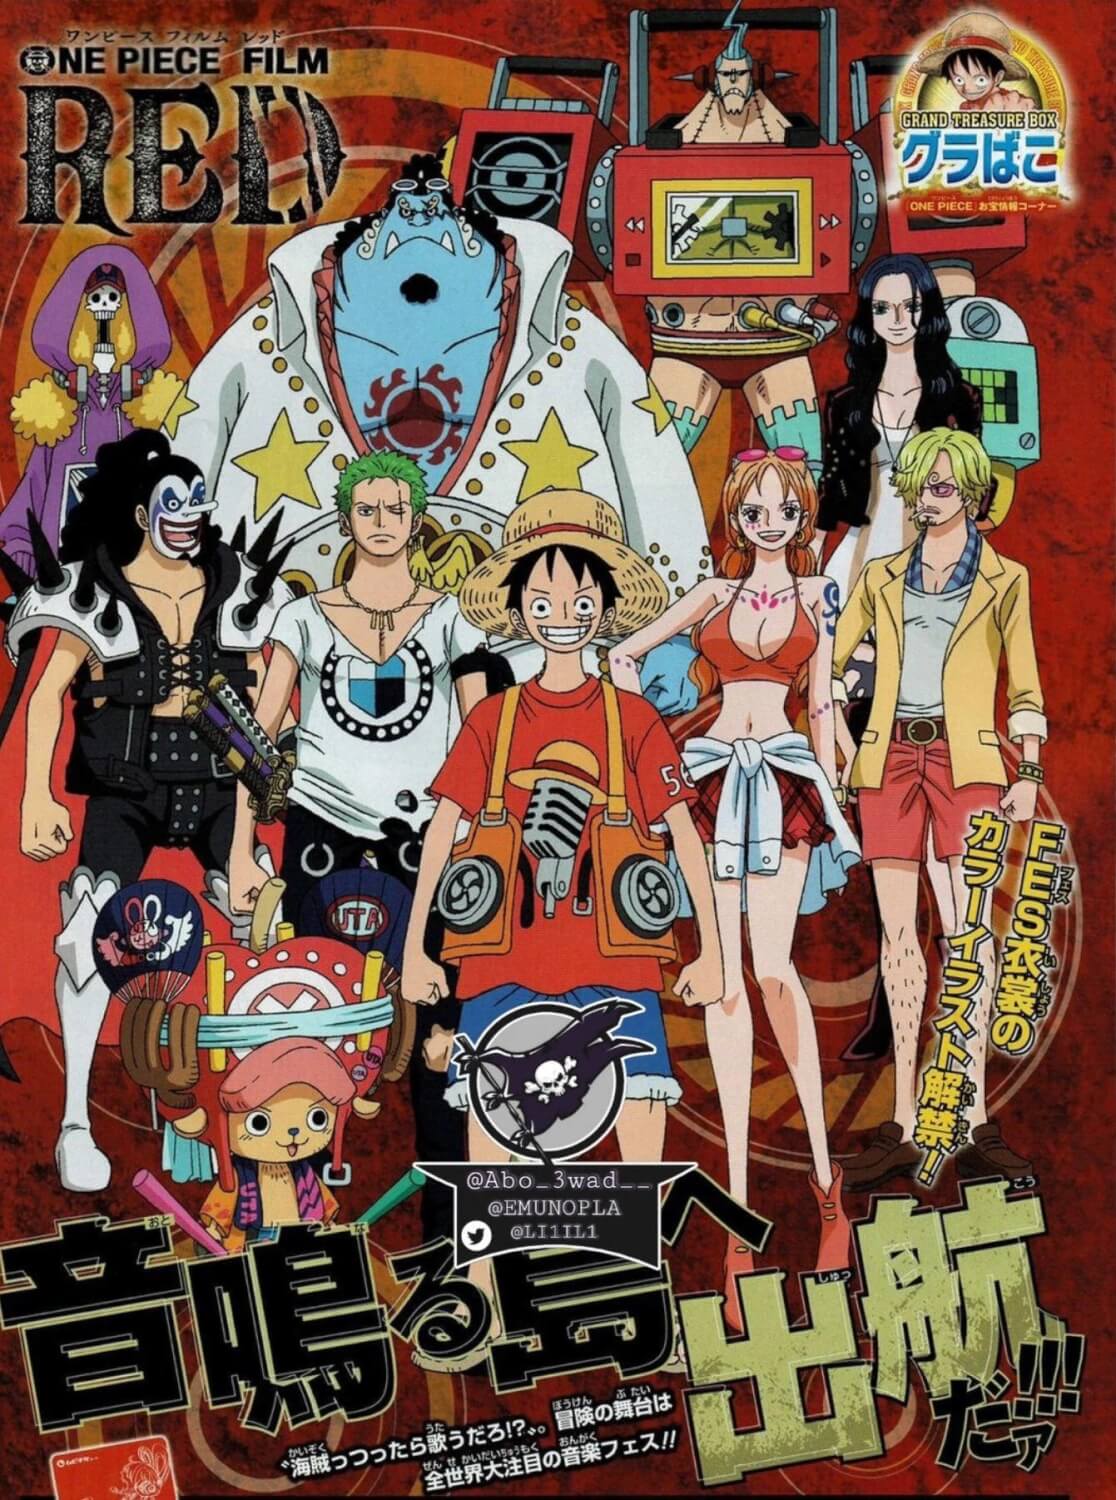 One Piece Red Poster